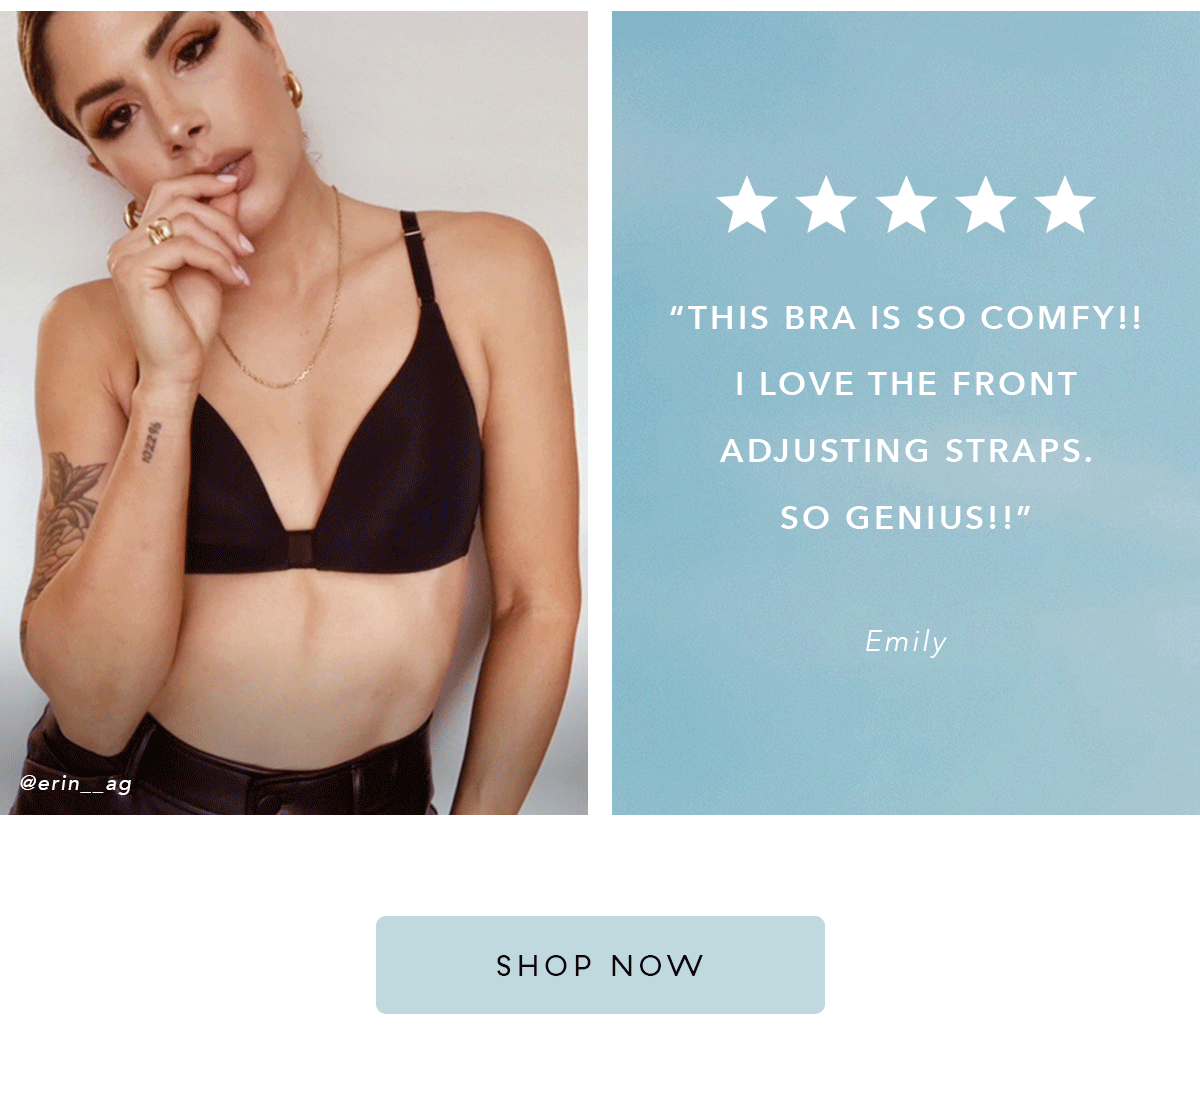 Lively: This Bra Is Sooo FLEXIBLE!